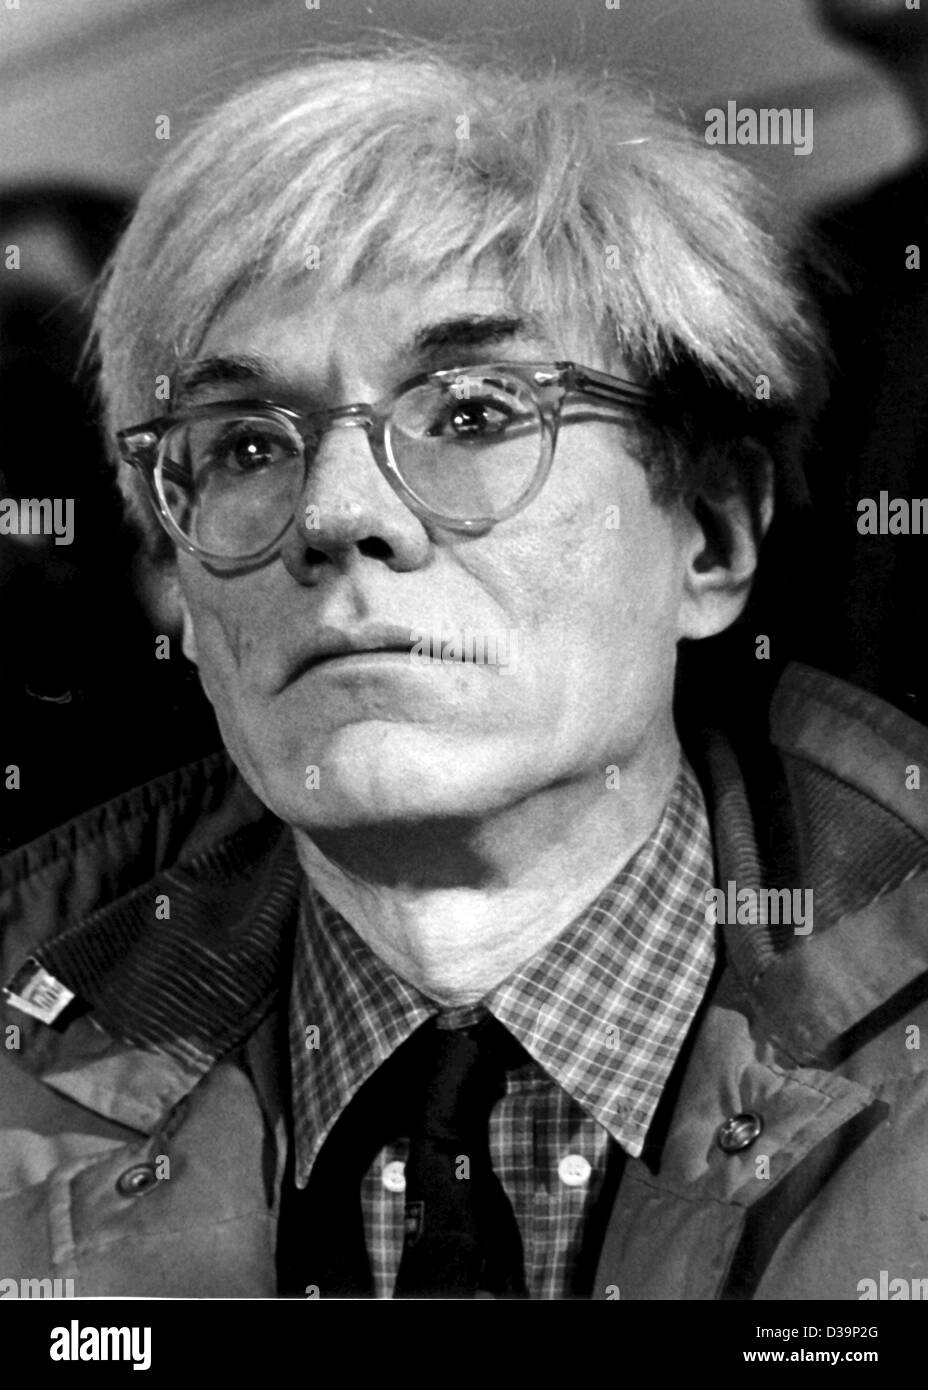 (dpa files) - The American artist Andy Warhol (1928 - 1987), pictured in Berlin, 3 March 1982. Warhol is considered founder and major figure of the pop art movement. Stock Photo